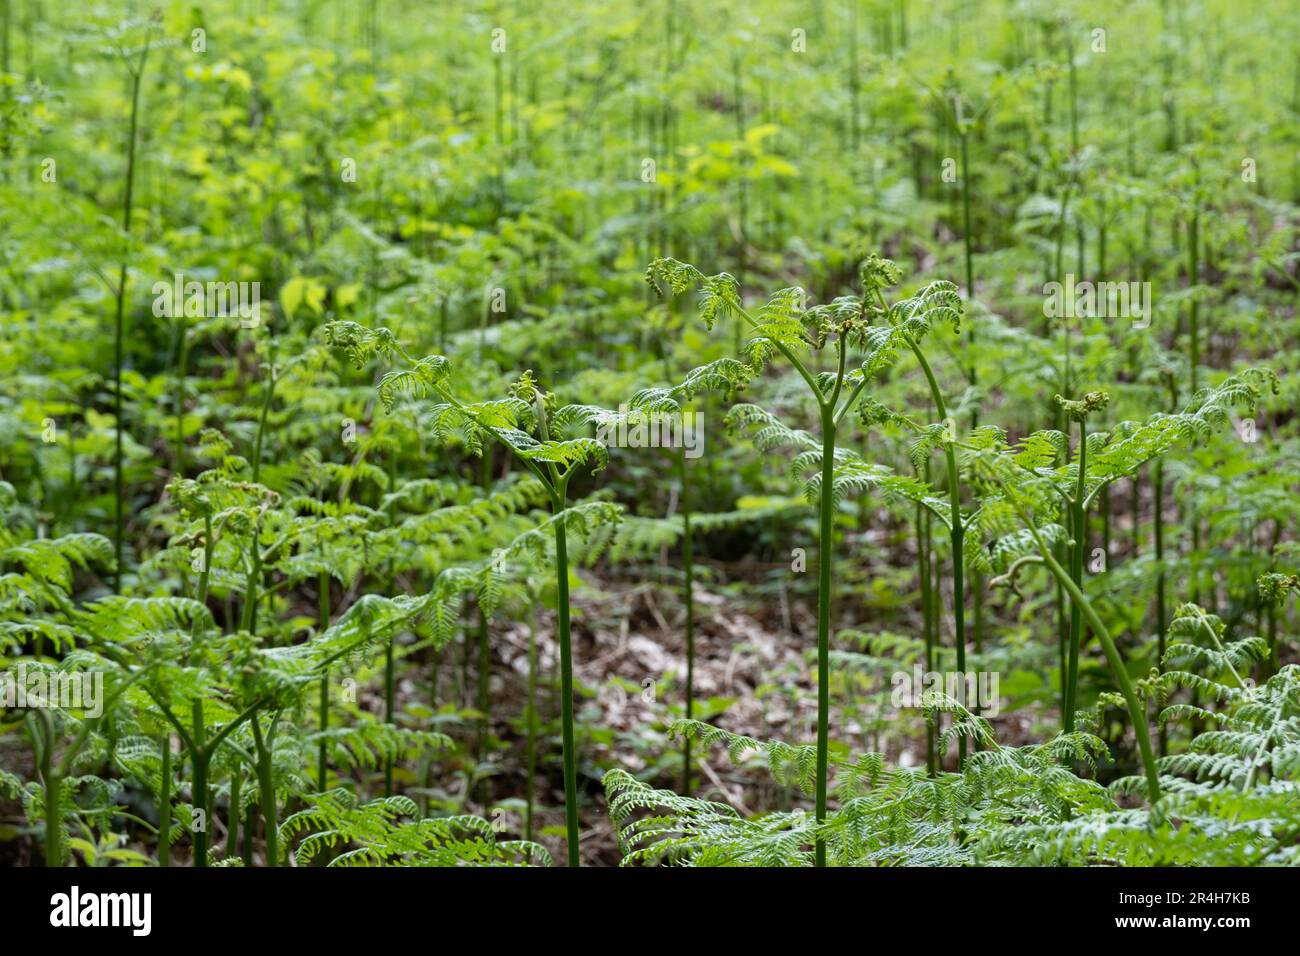 Field full of young fresh green ferns in a forest, growing straight upwards. Focus on the ferns in the foreground. Background image Stock Photo